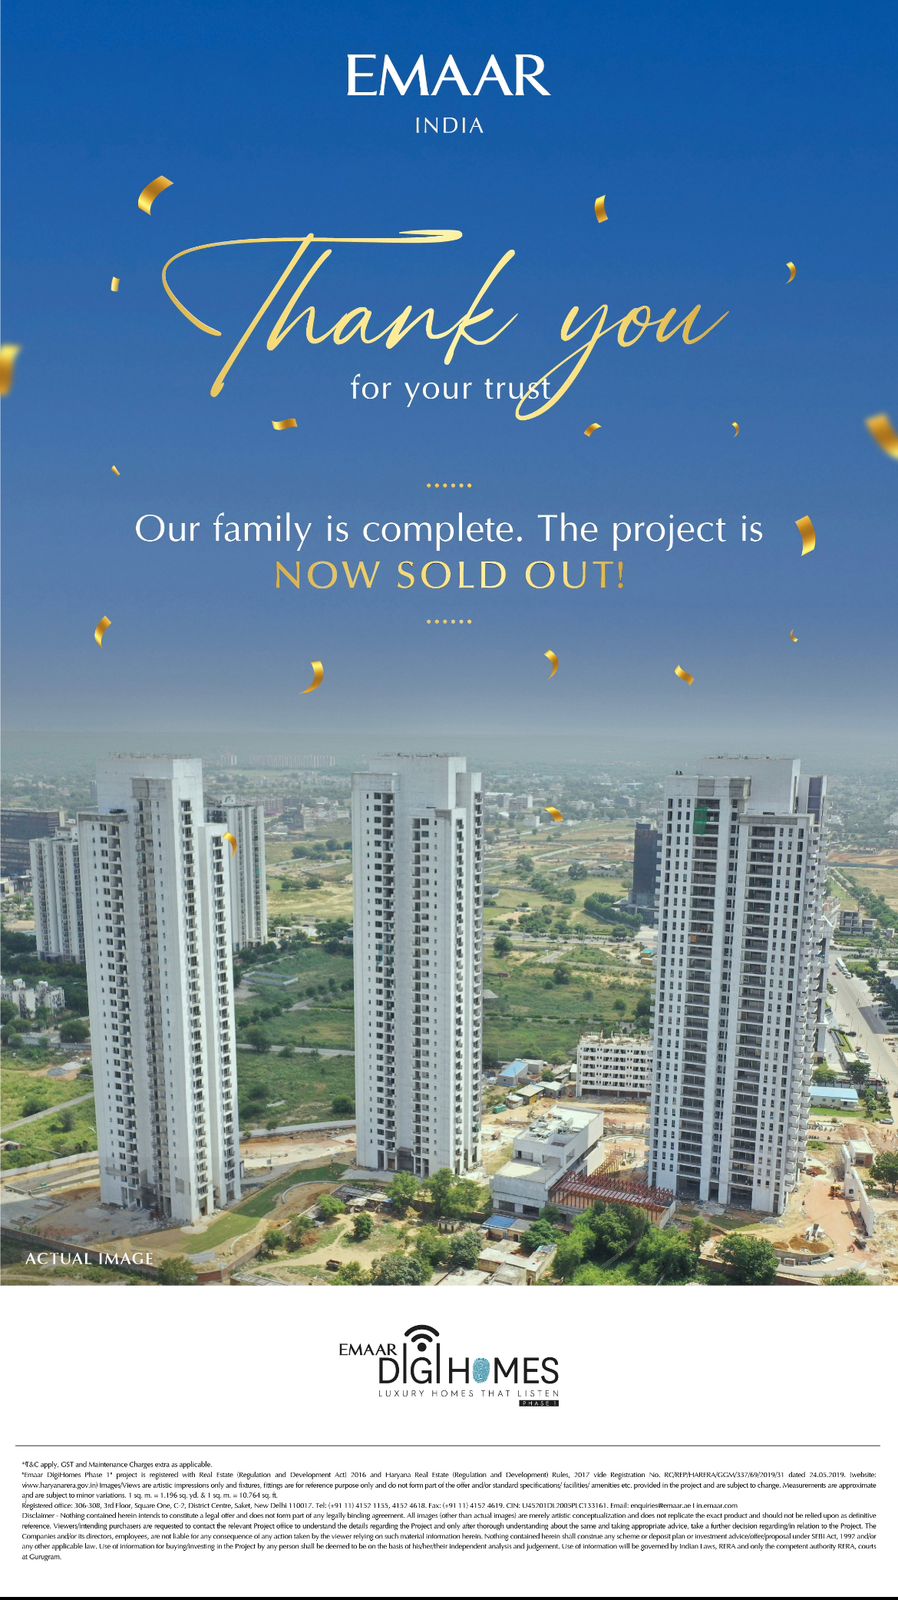 Now sold out at Emaar Digi Homes in Sector 62, Gurgaon Update